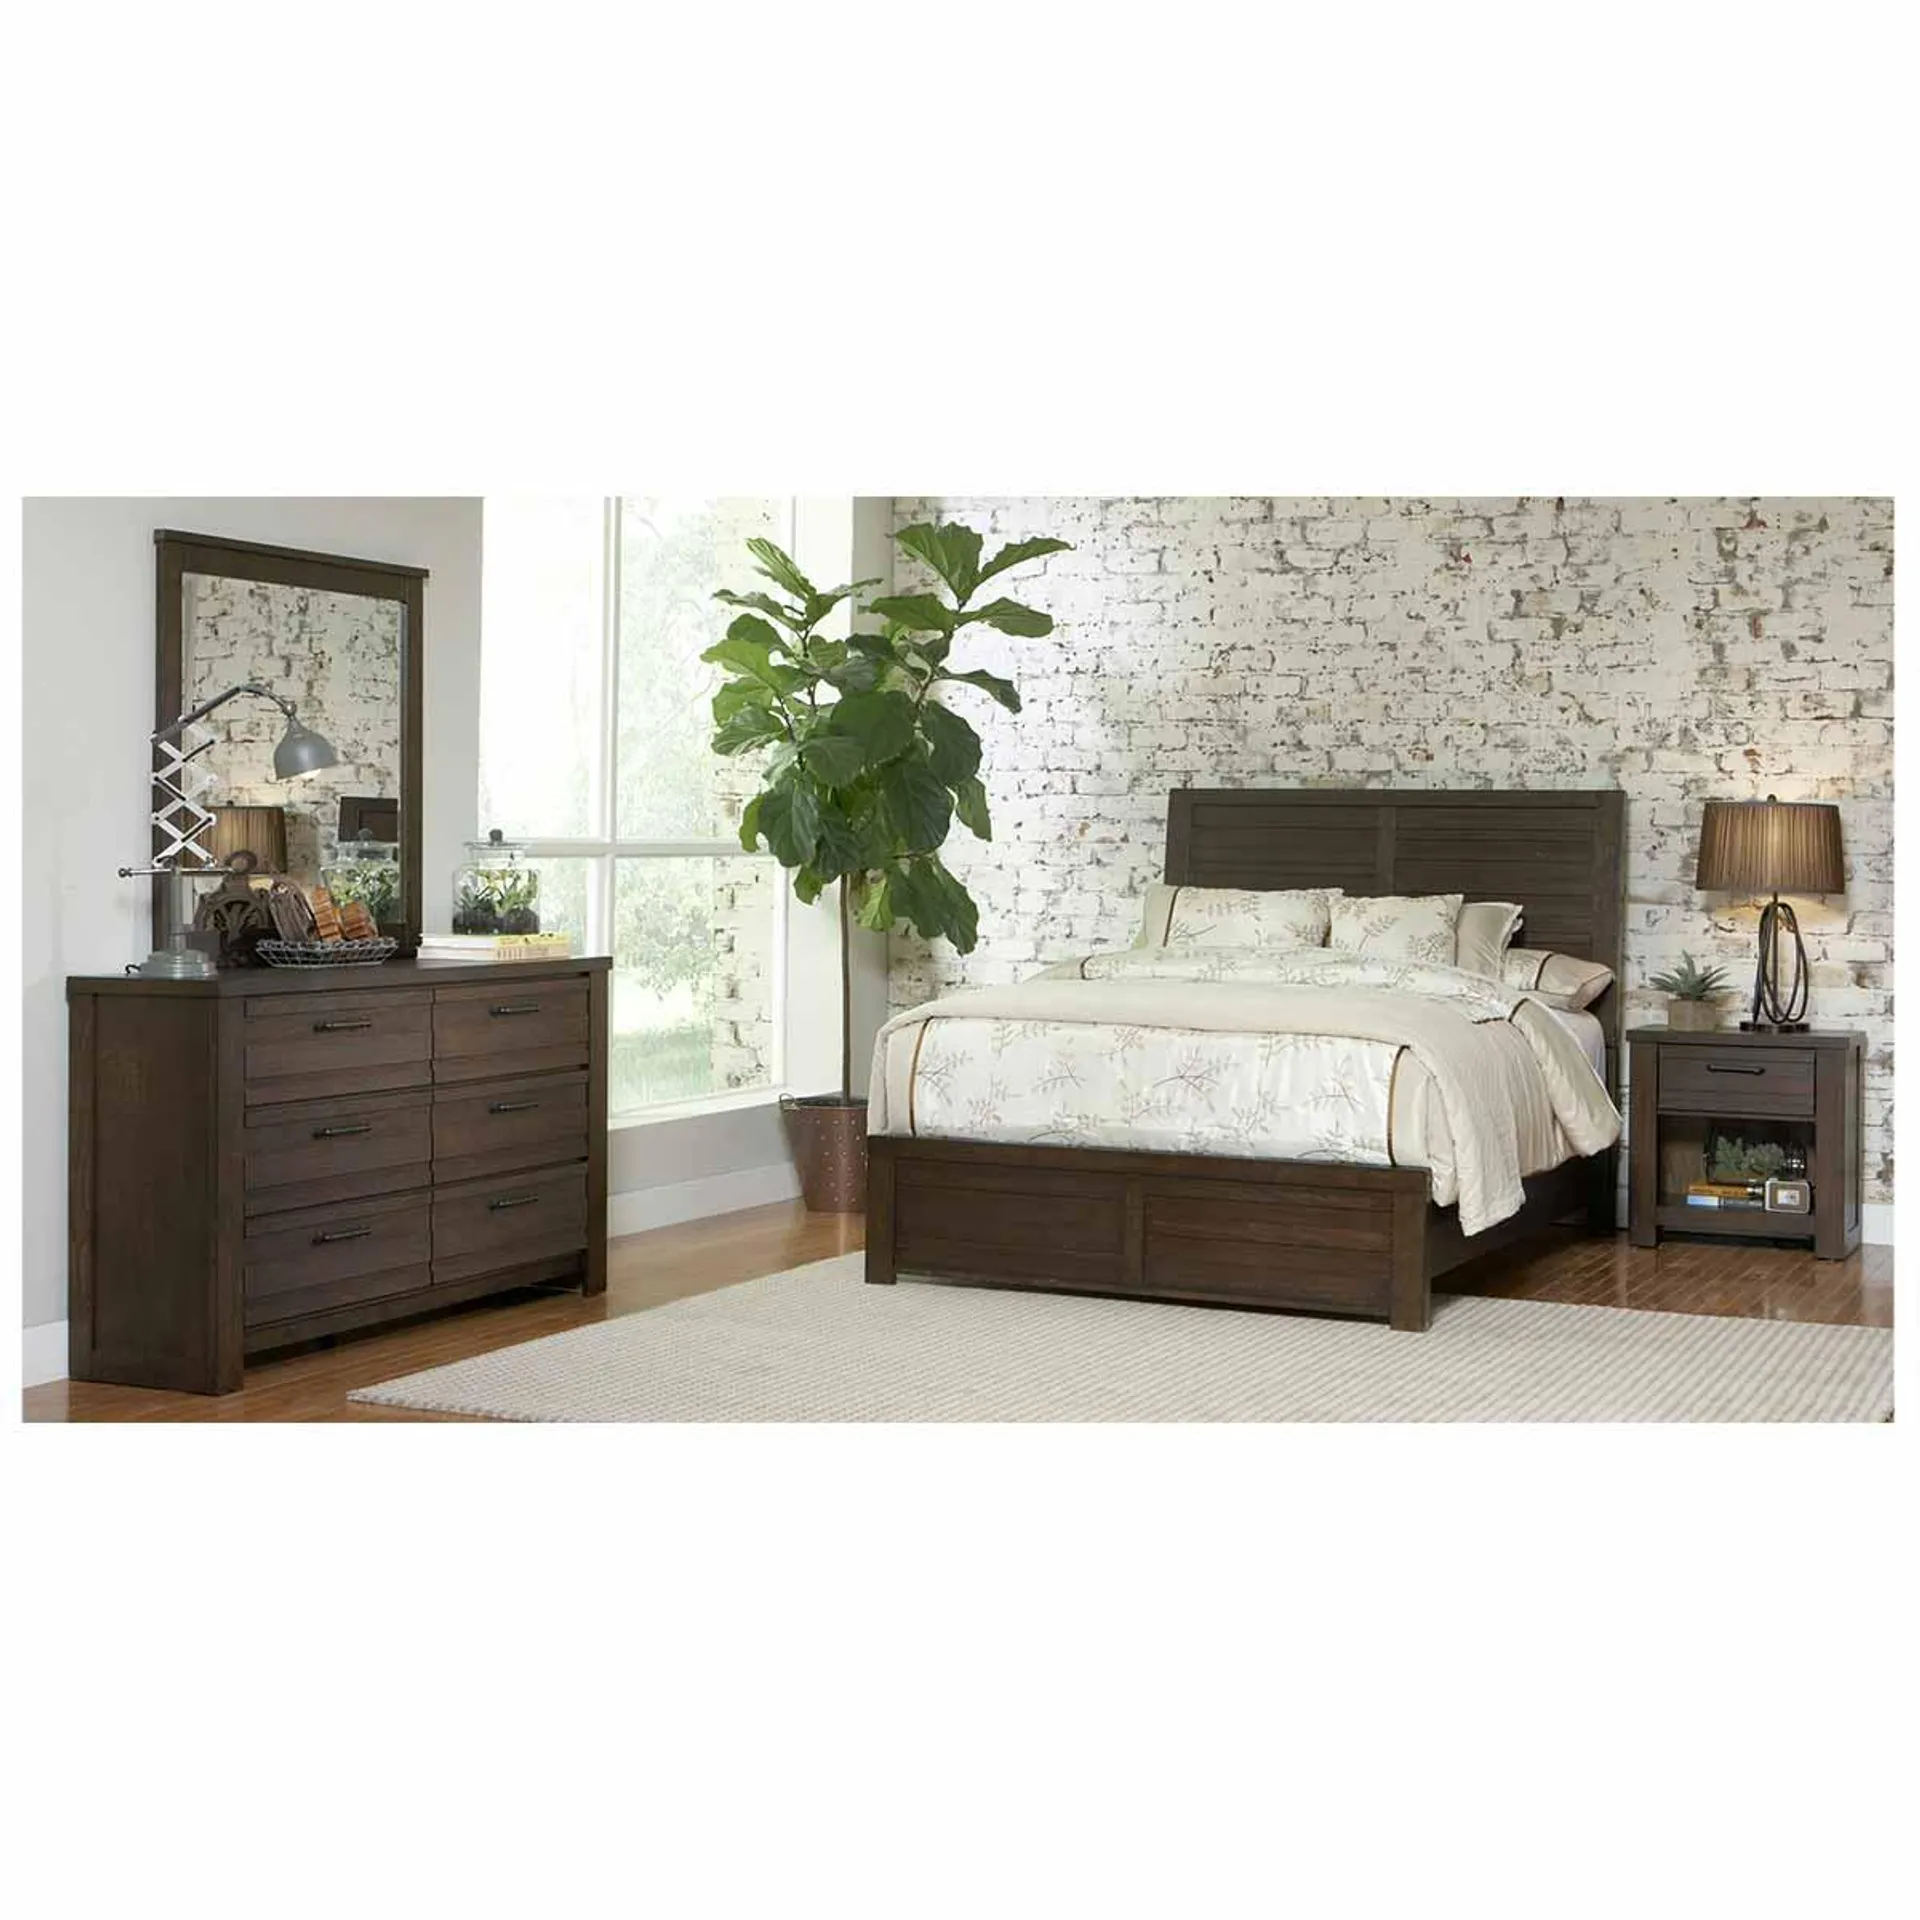 Elements International Morrow Charcoal Queen Upholstered Bed